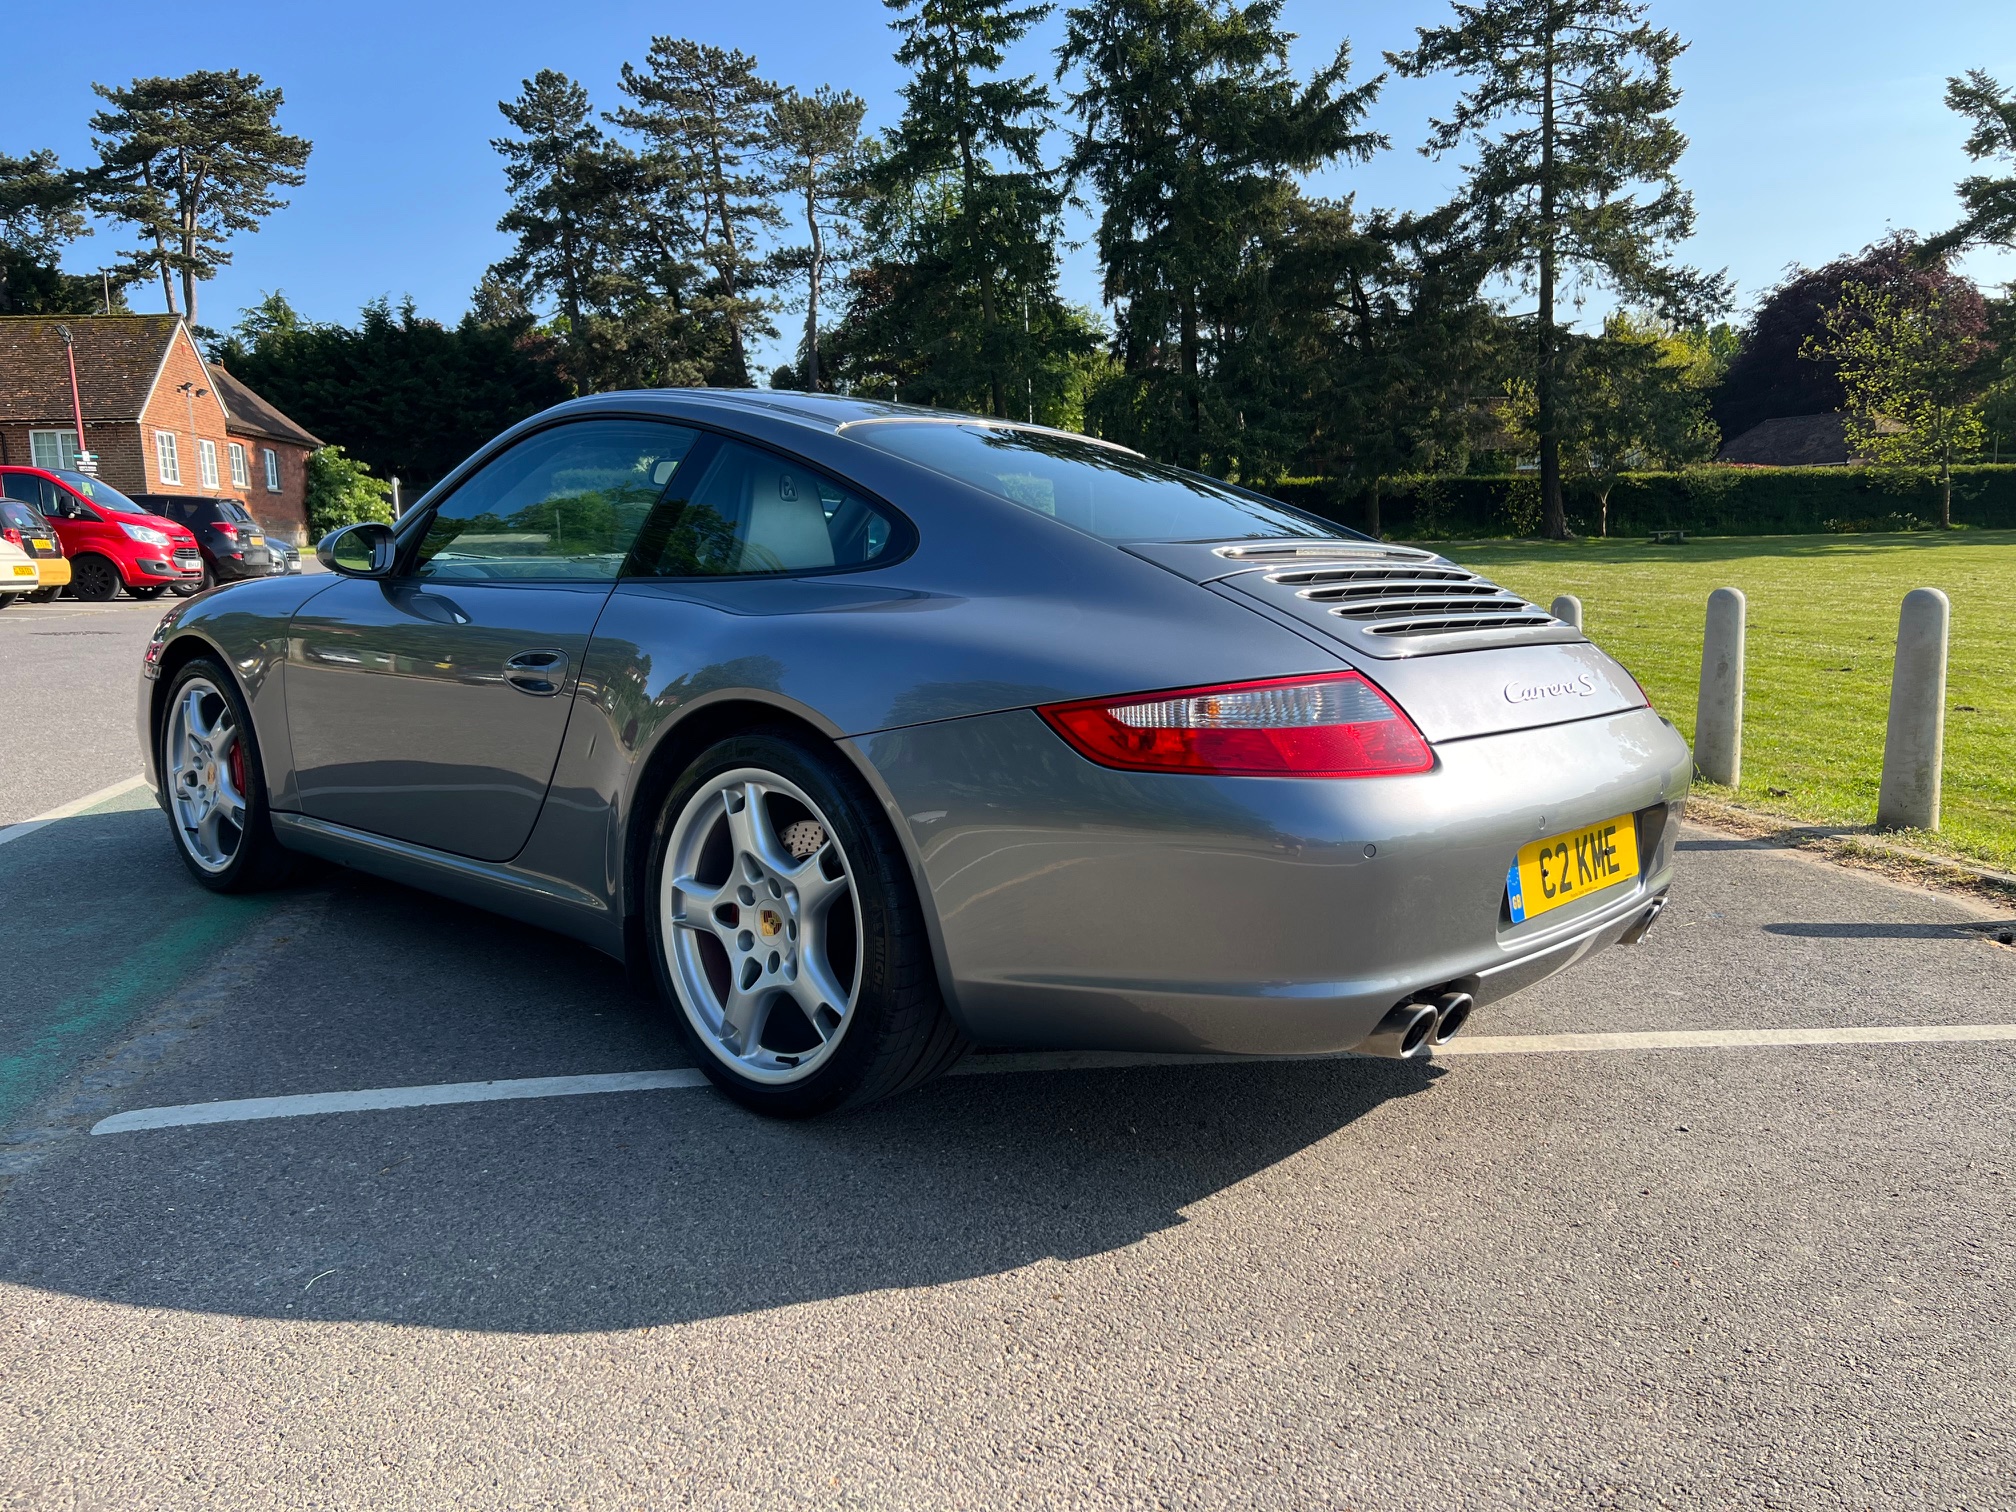 The 997 - General Discussion Thread - Page 10 - 911/Carrera GT - PistonHeads UK